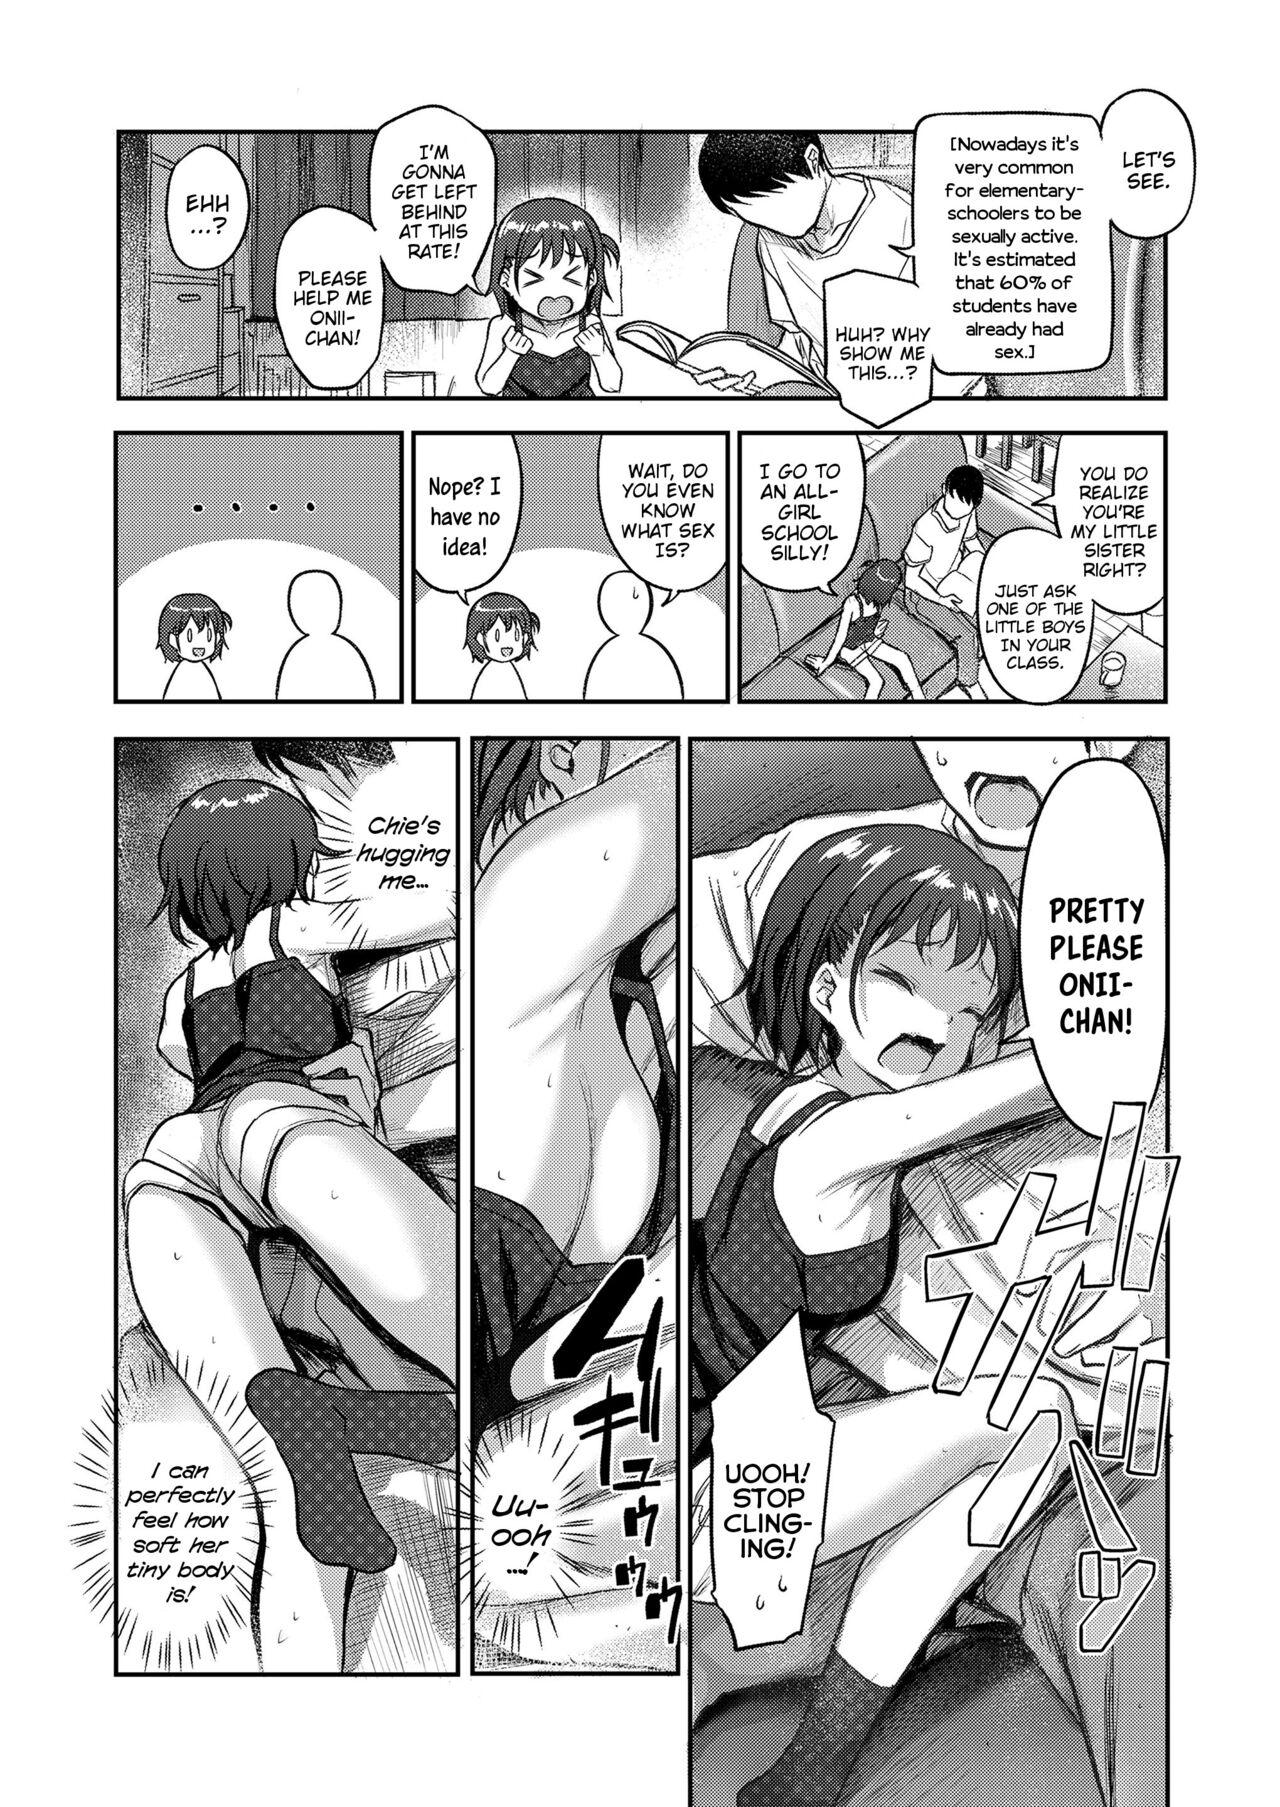 Moan Koukishin Ousei na Onnanoko | A Young Girl Brimming With Curiousity Couch - Page 2